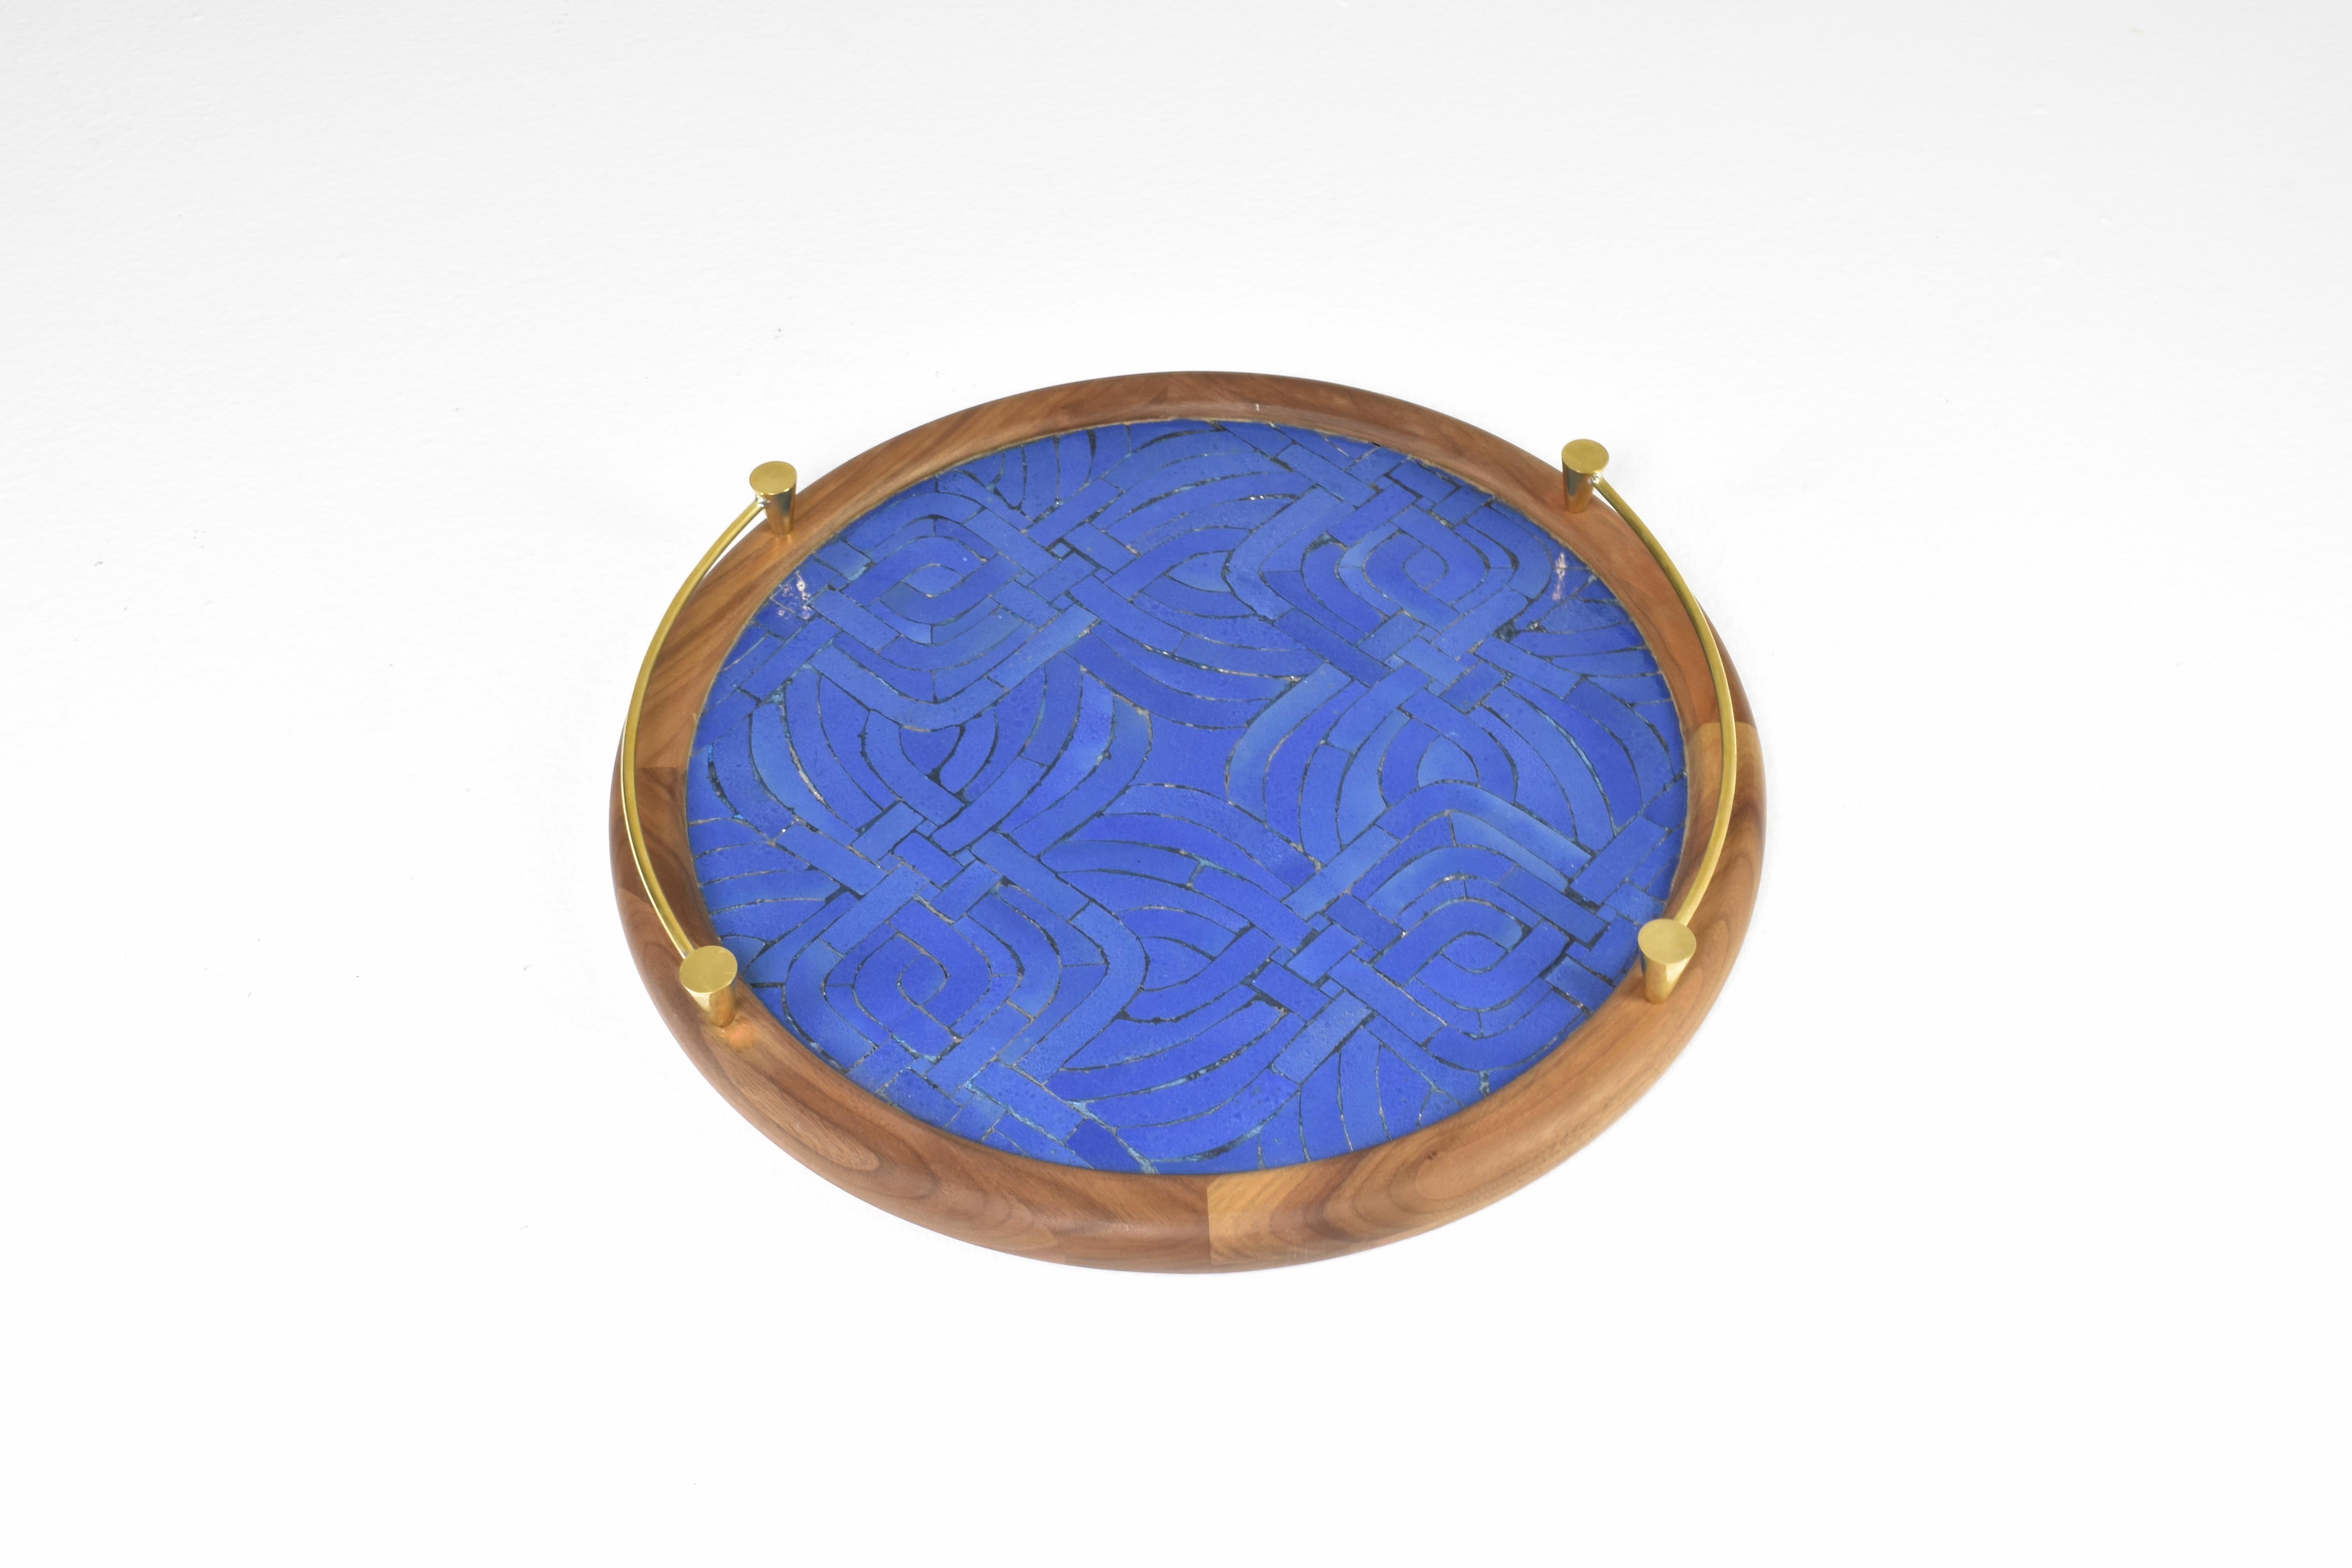 A contemporary handcrafted tray composed of a handmade mosaic Moroccan zellige surface, a walnut frame and polished elegant brass handles.
Designed by Jonathan Amar at his atelier in Rabat

This piece is meticulously handcrafted, imbuing it with a